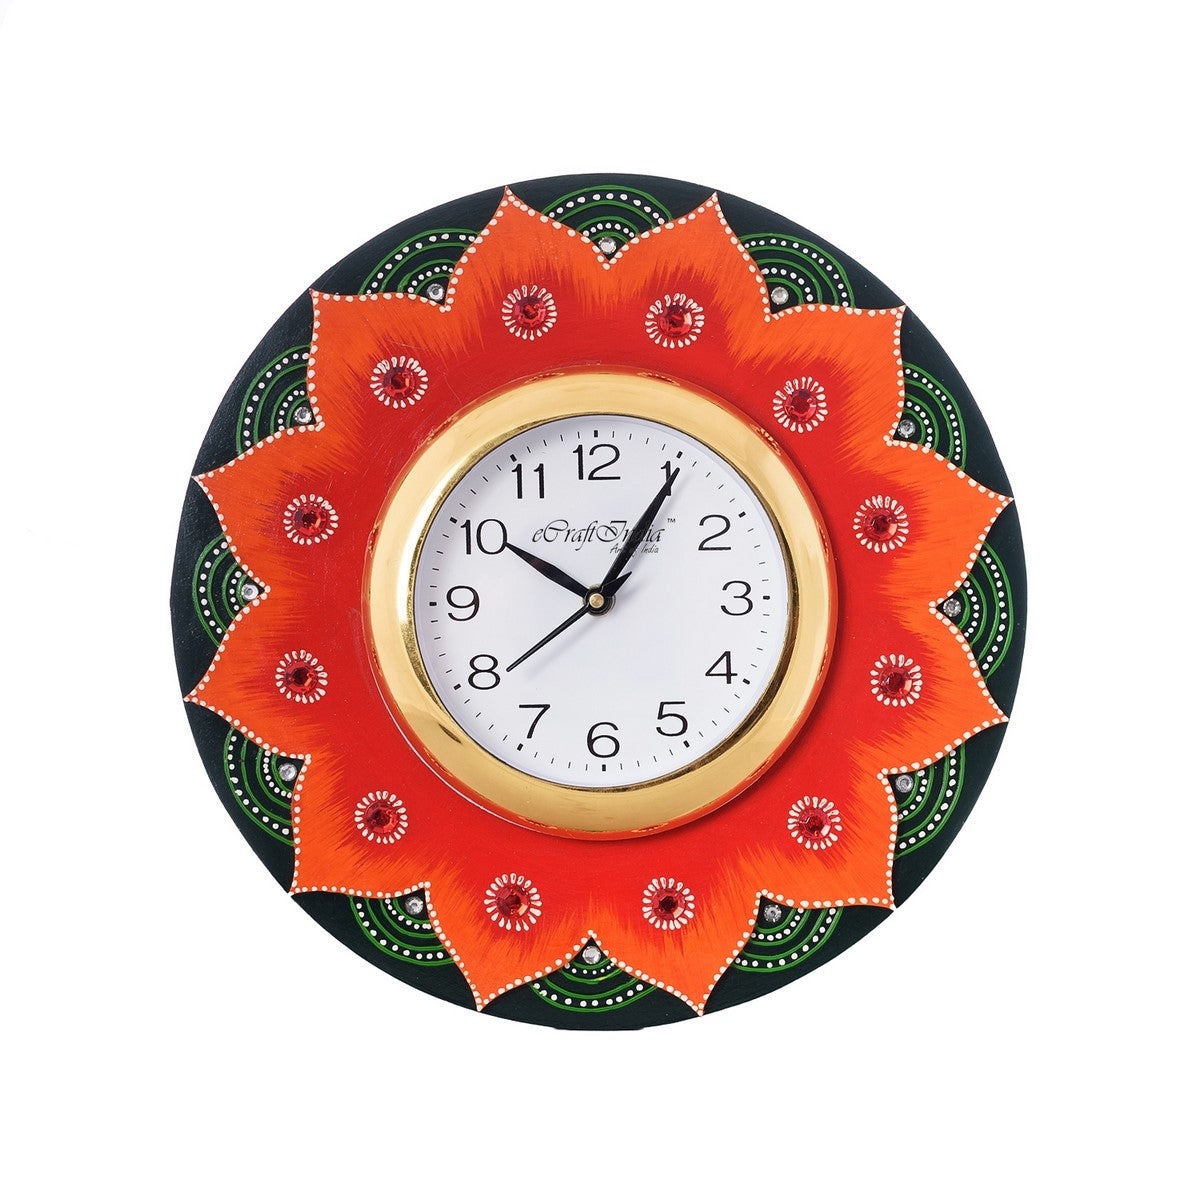 Crystal Studded Floral Shape Wooden Handcrafted Wall Clock